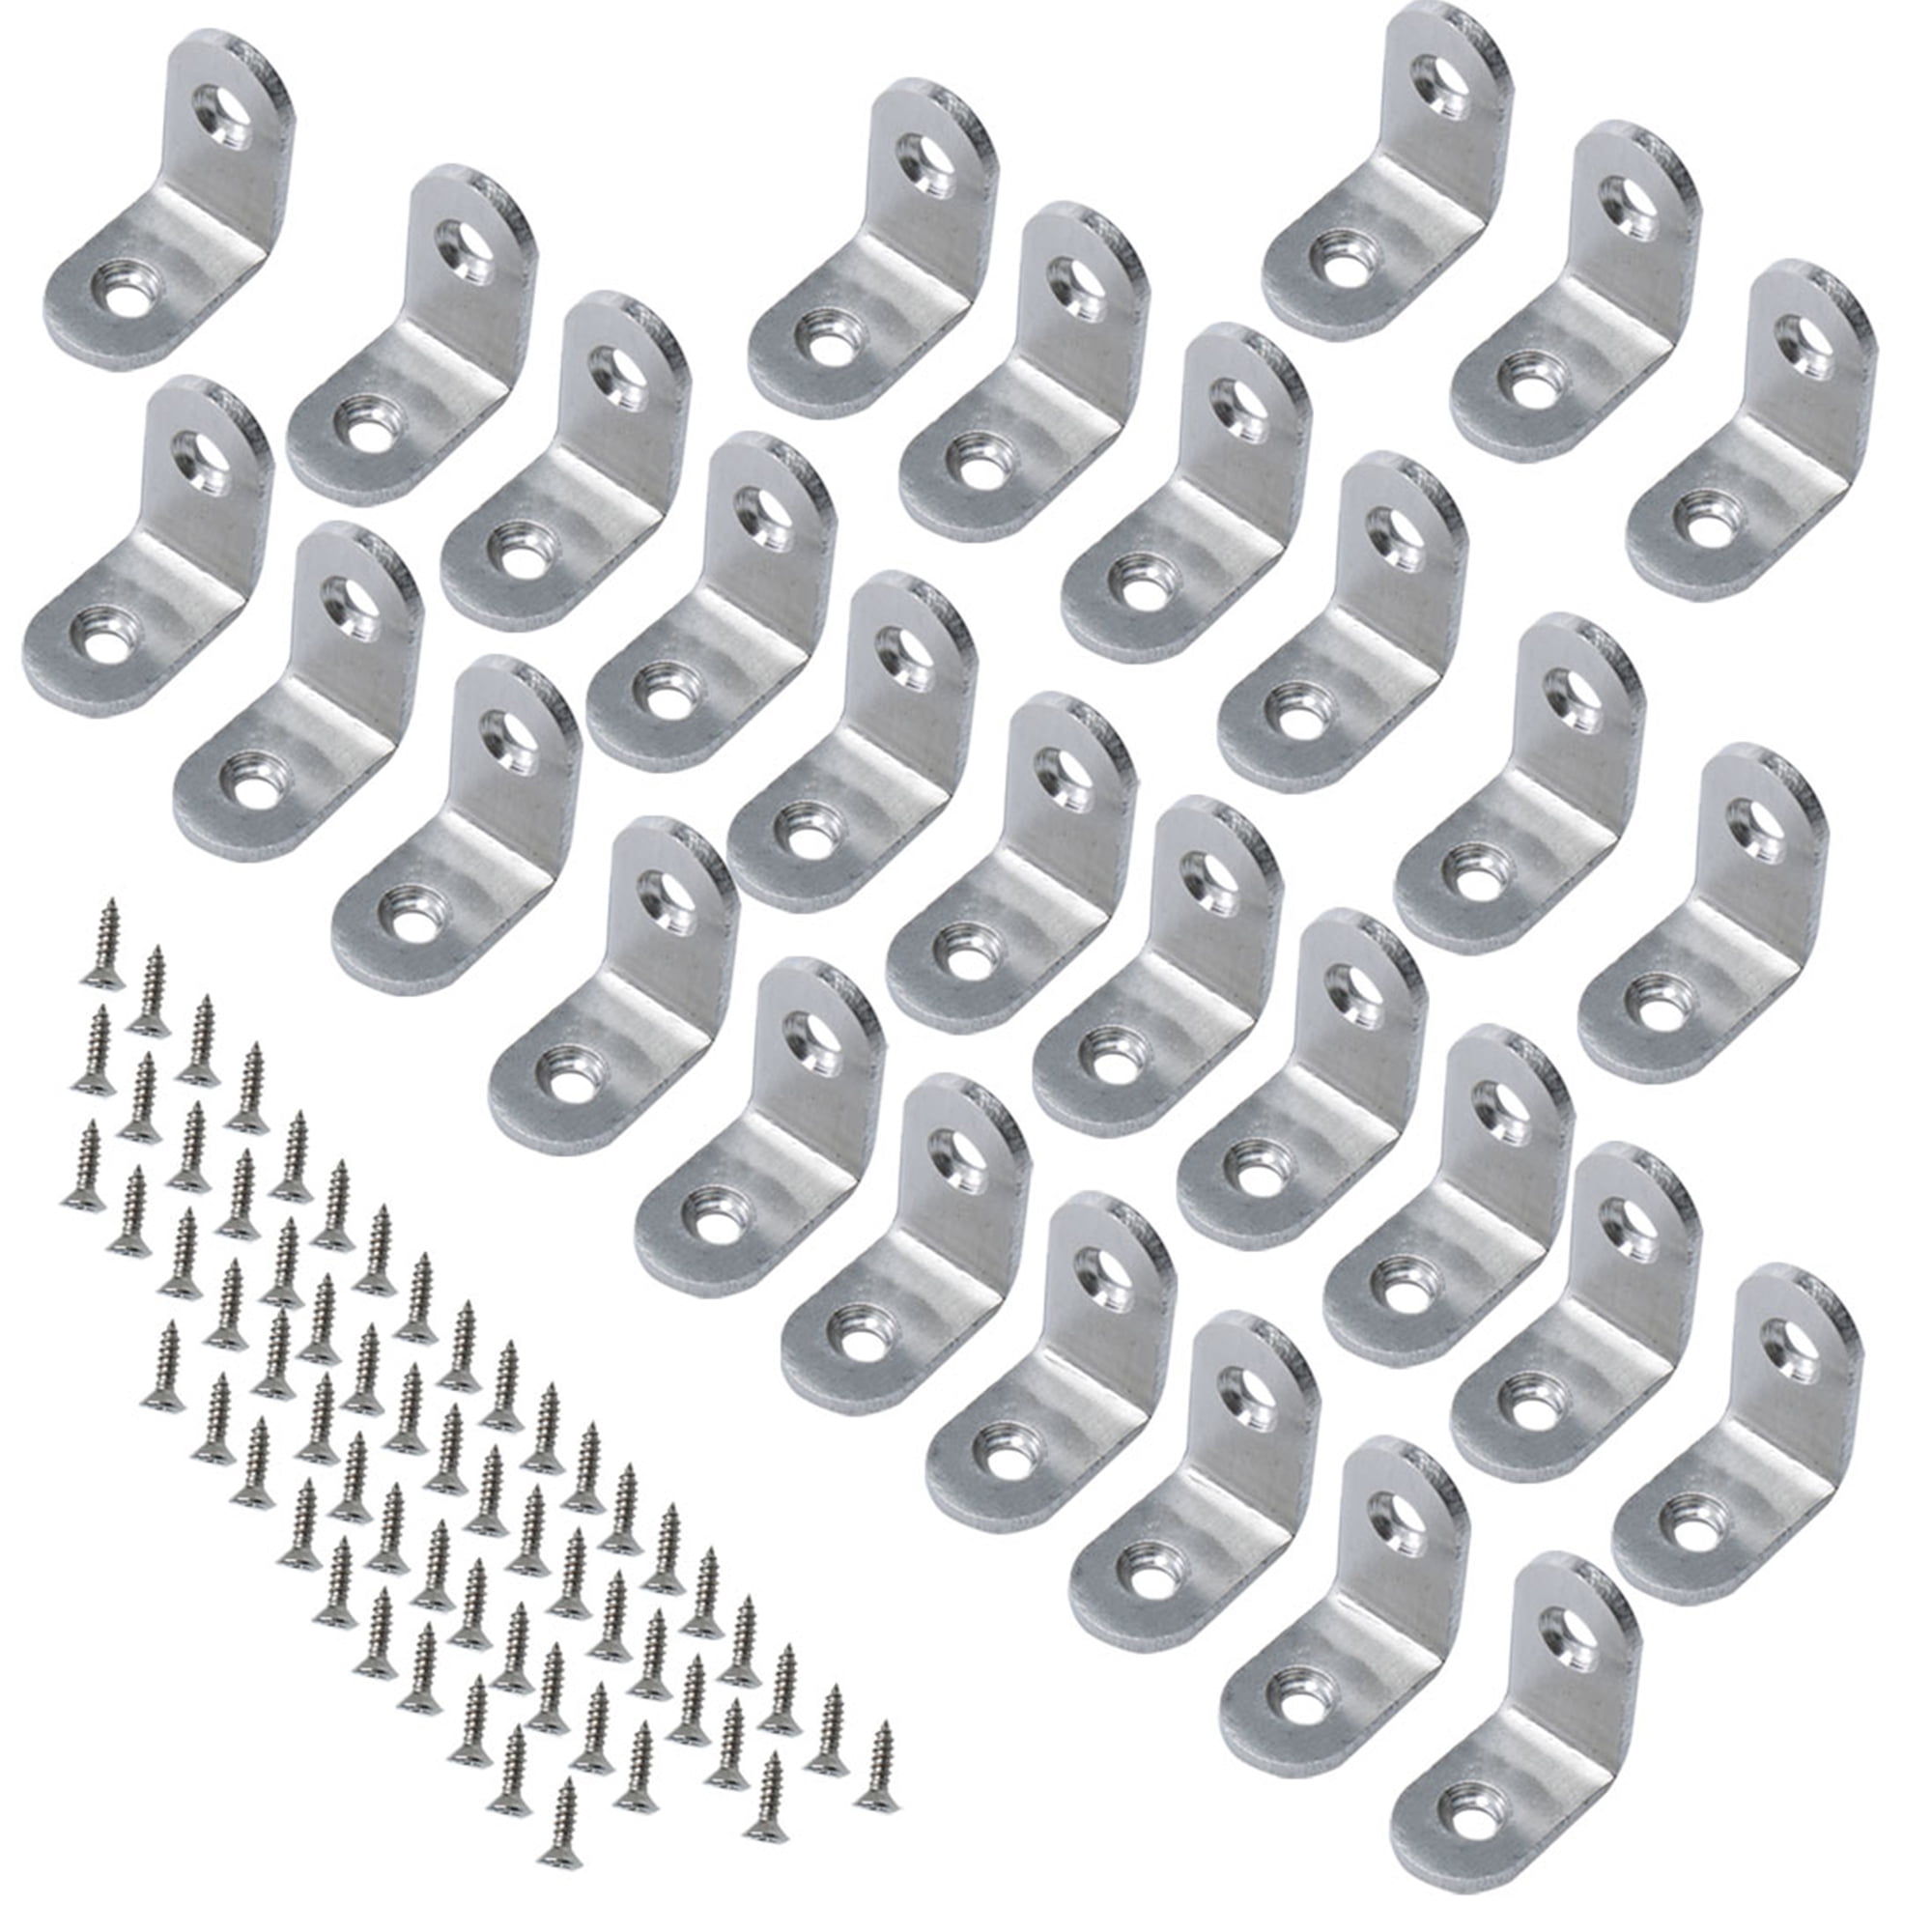 Uxcell 25 x 25mm Stainless Steel L Shaped Angle Brackets with Screws,30 ...